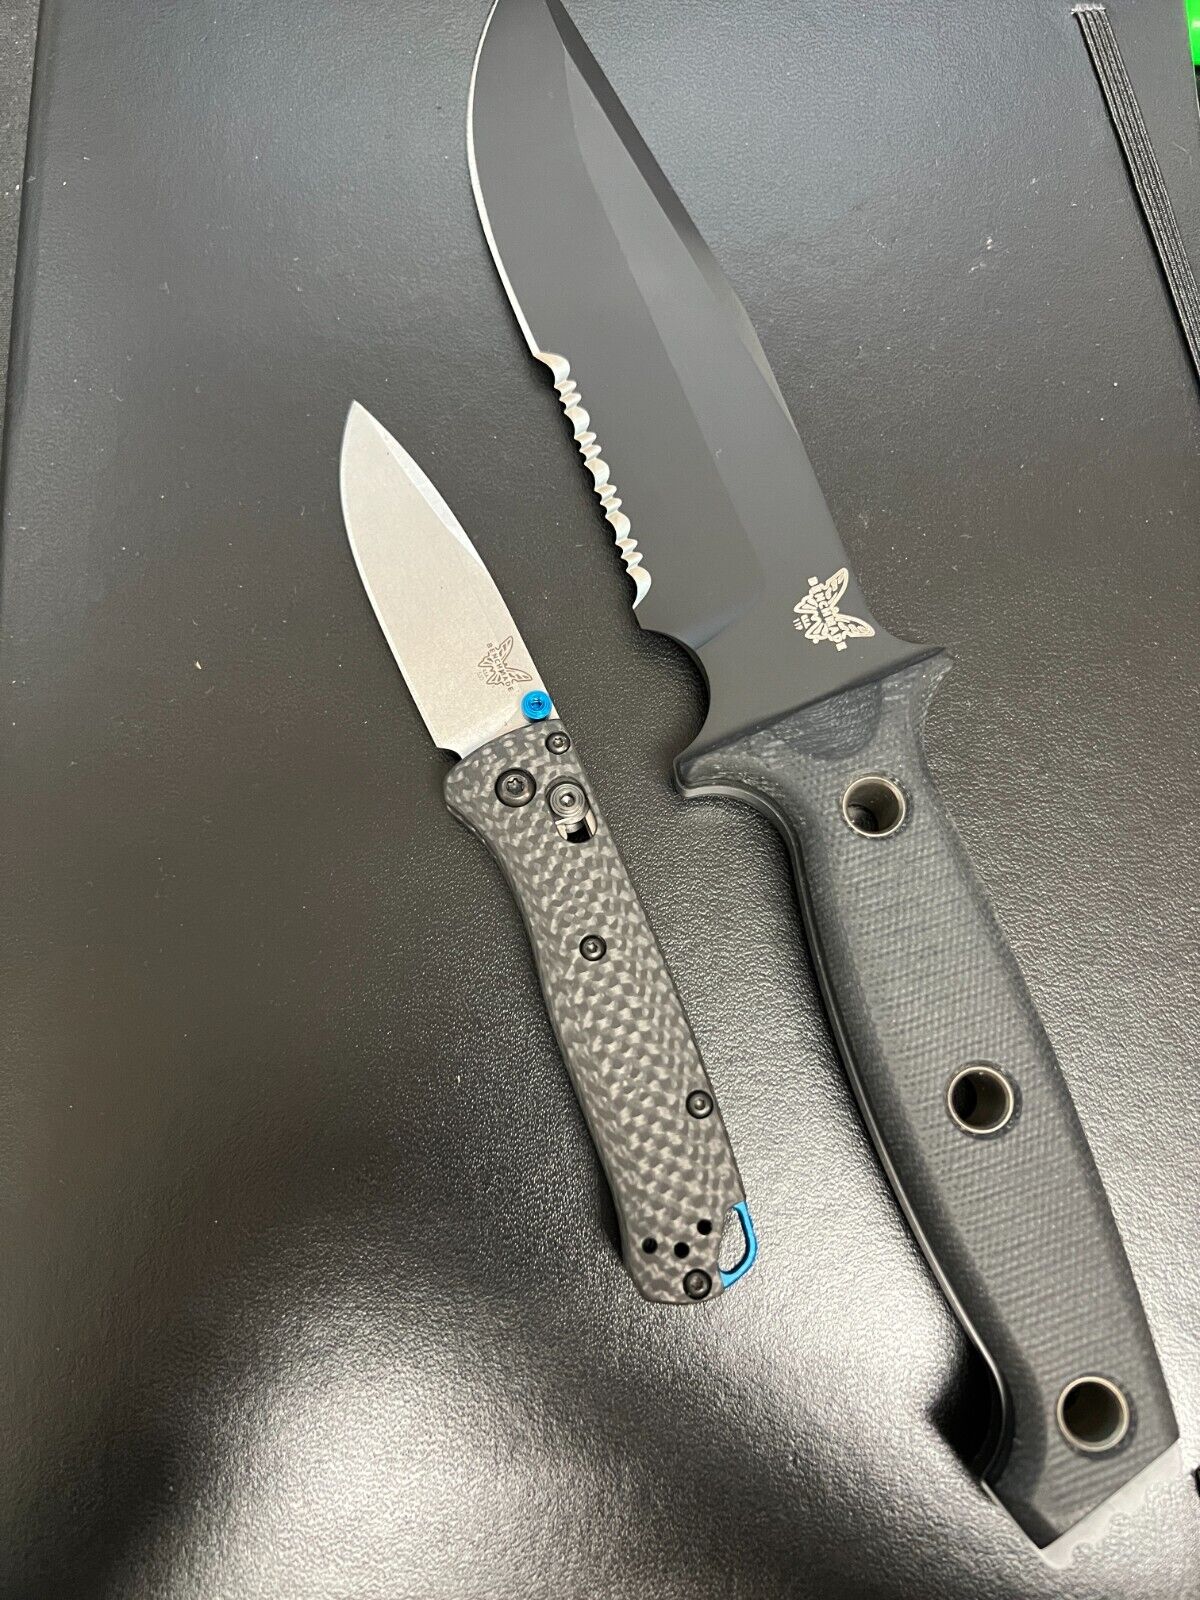 BENCHMADE KNIFE 119SBK ARVENSIS + 533-3 Bugout First production